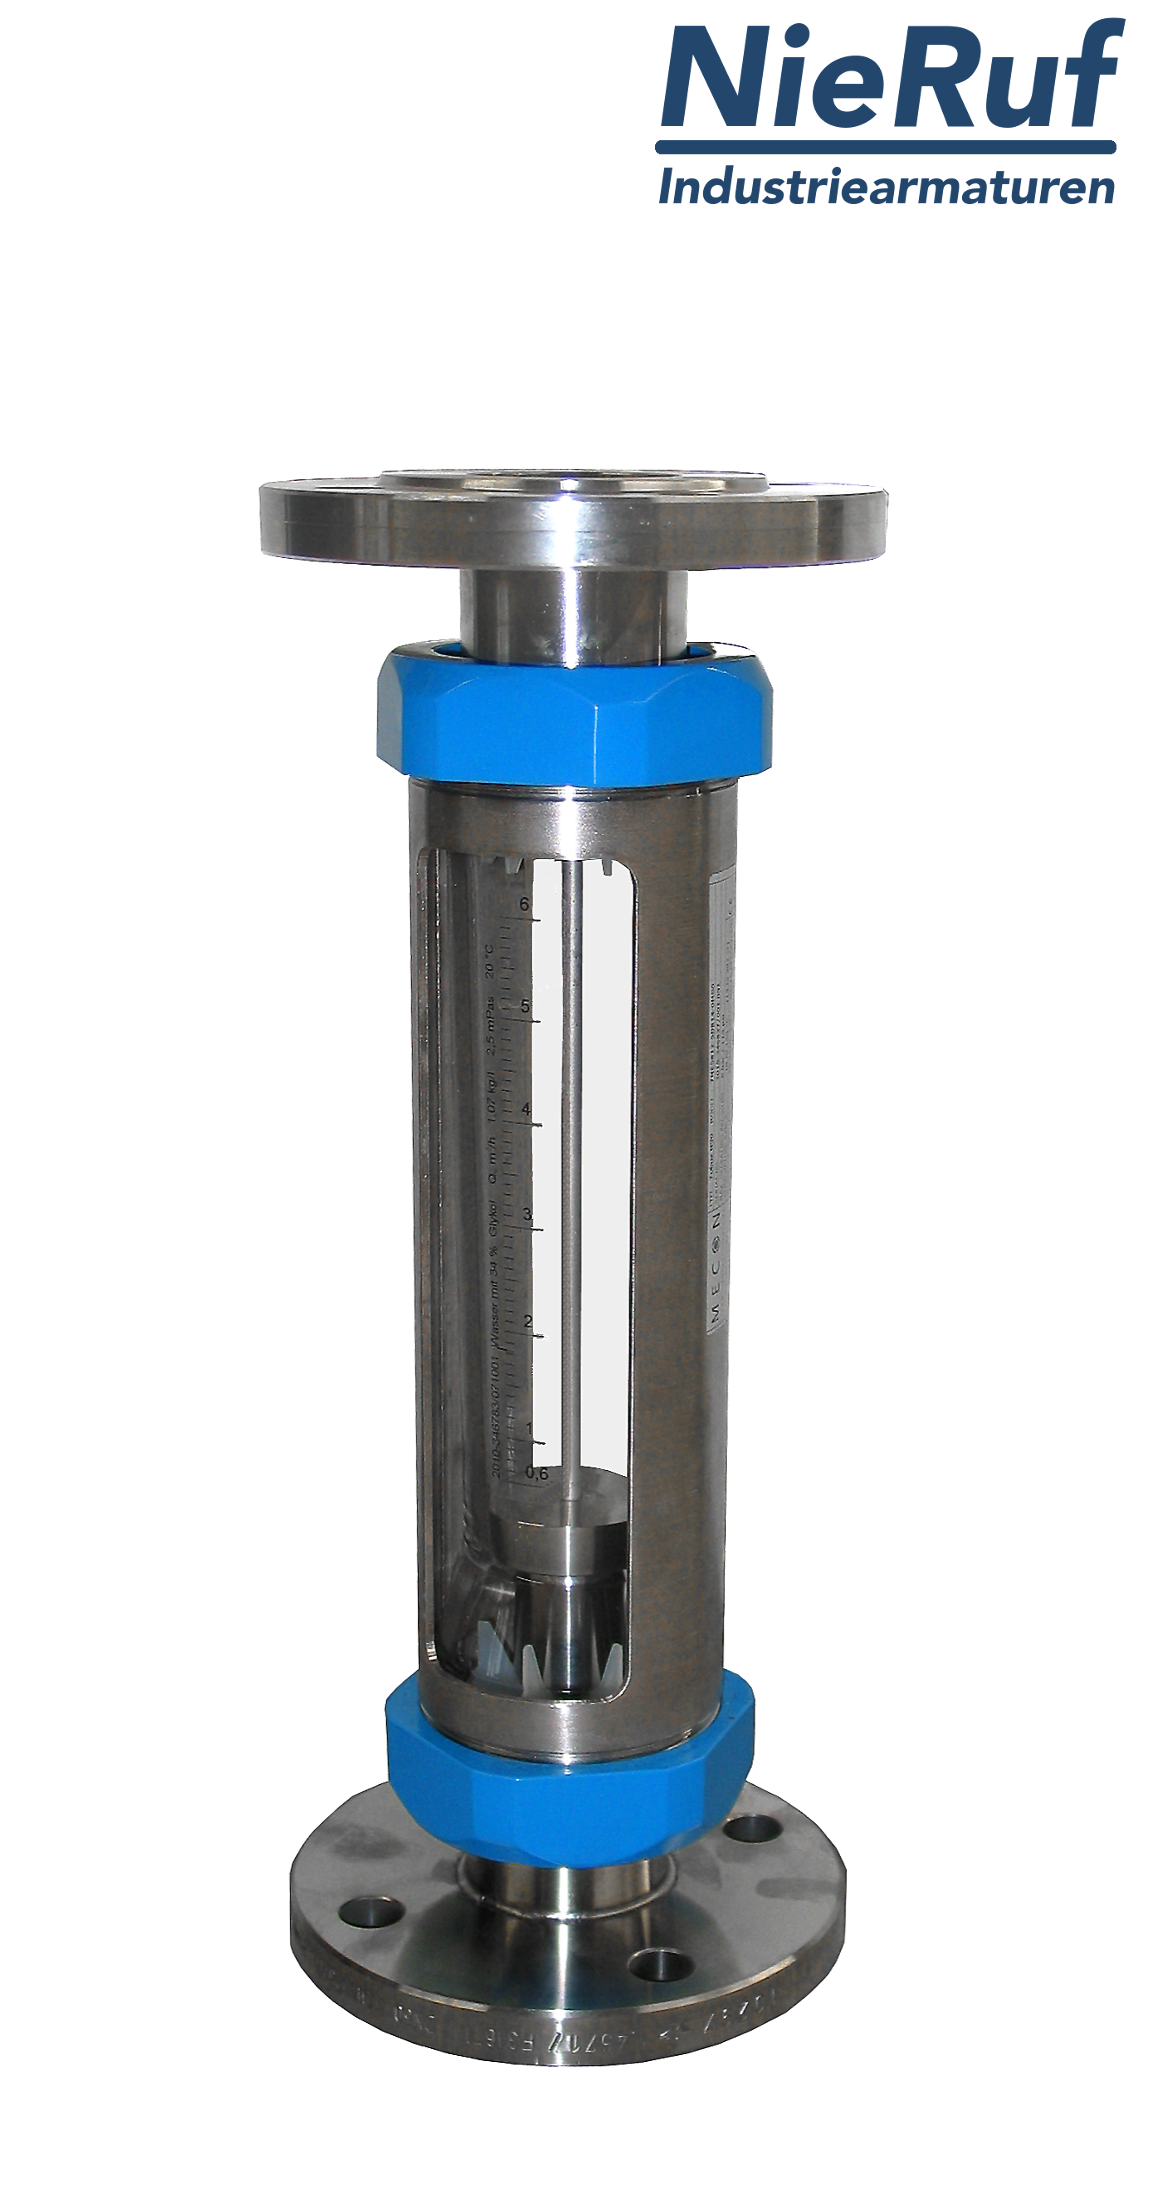 Variable area flowmeter stainless steel + borosilicate flange DN10 4.0 - 40.0 l/h water FKM